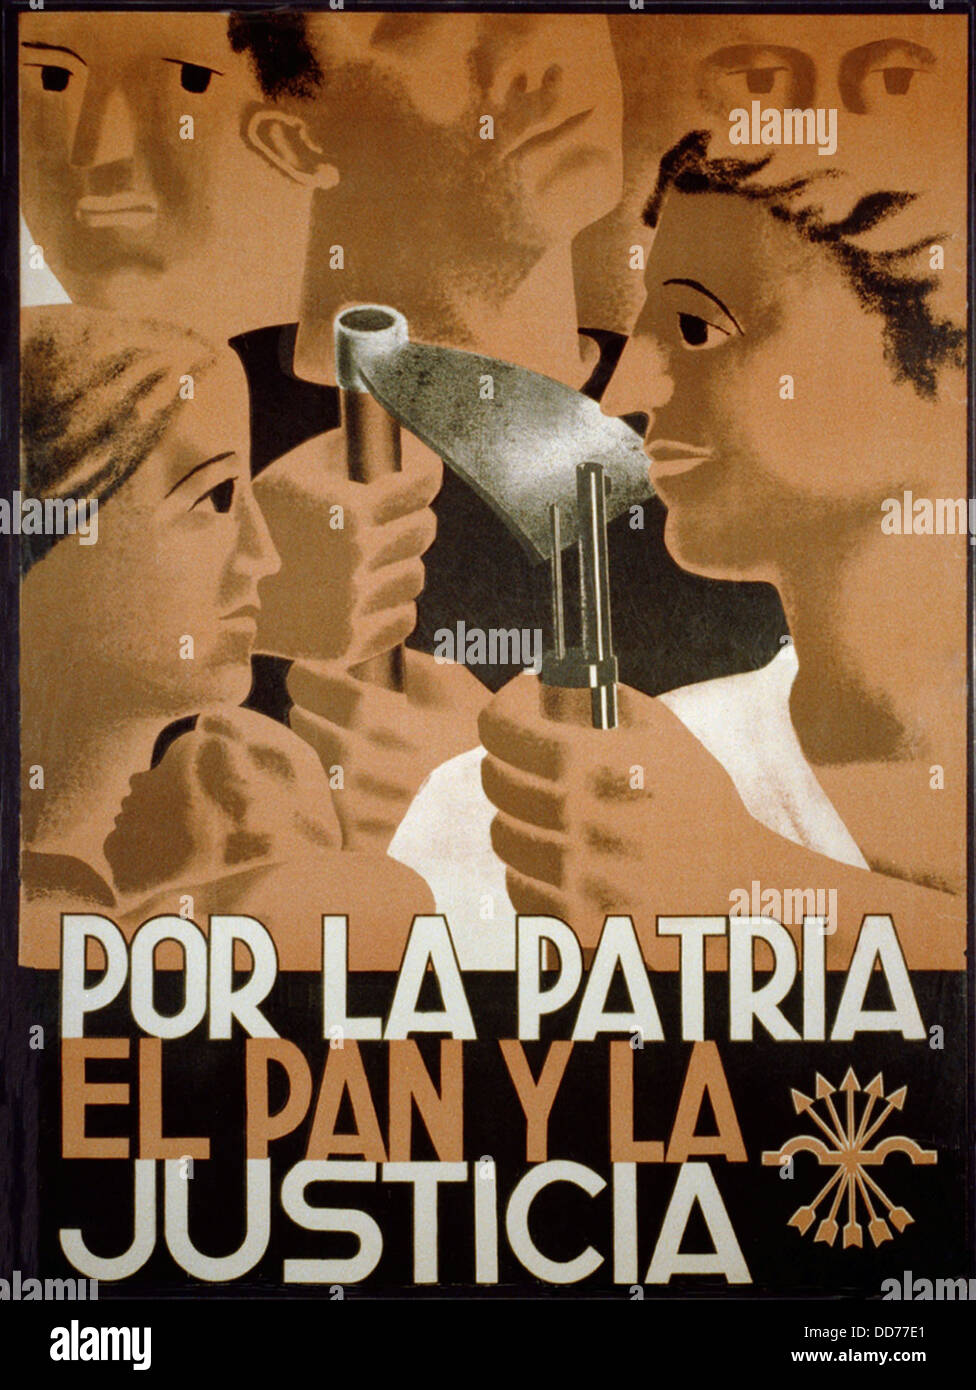 FOR THE HOMELAND, BREAD AND JUSTICE. Spanish Civil War poster presenting Nationalist propaganda. Image is a collage of stylized Stock Photo